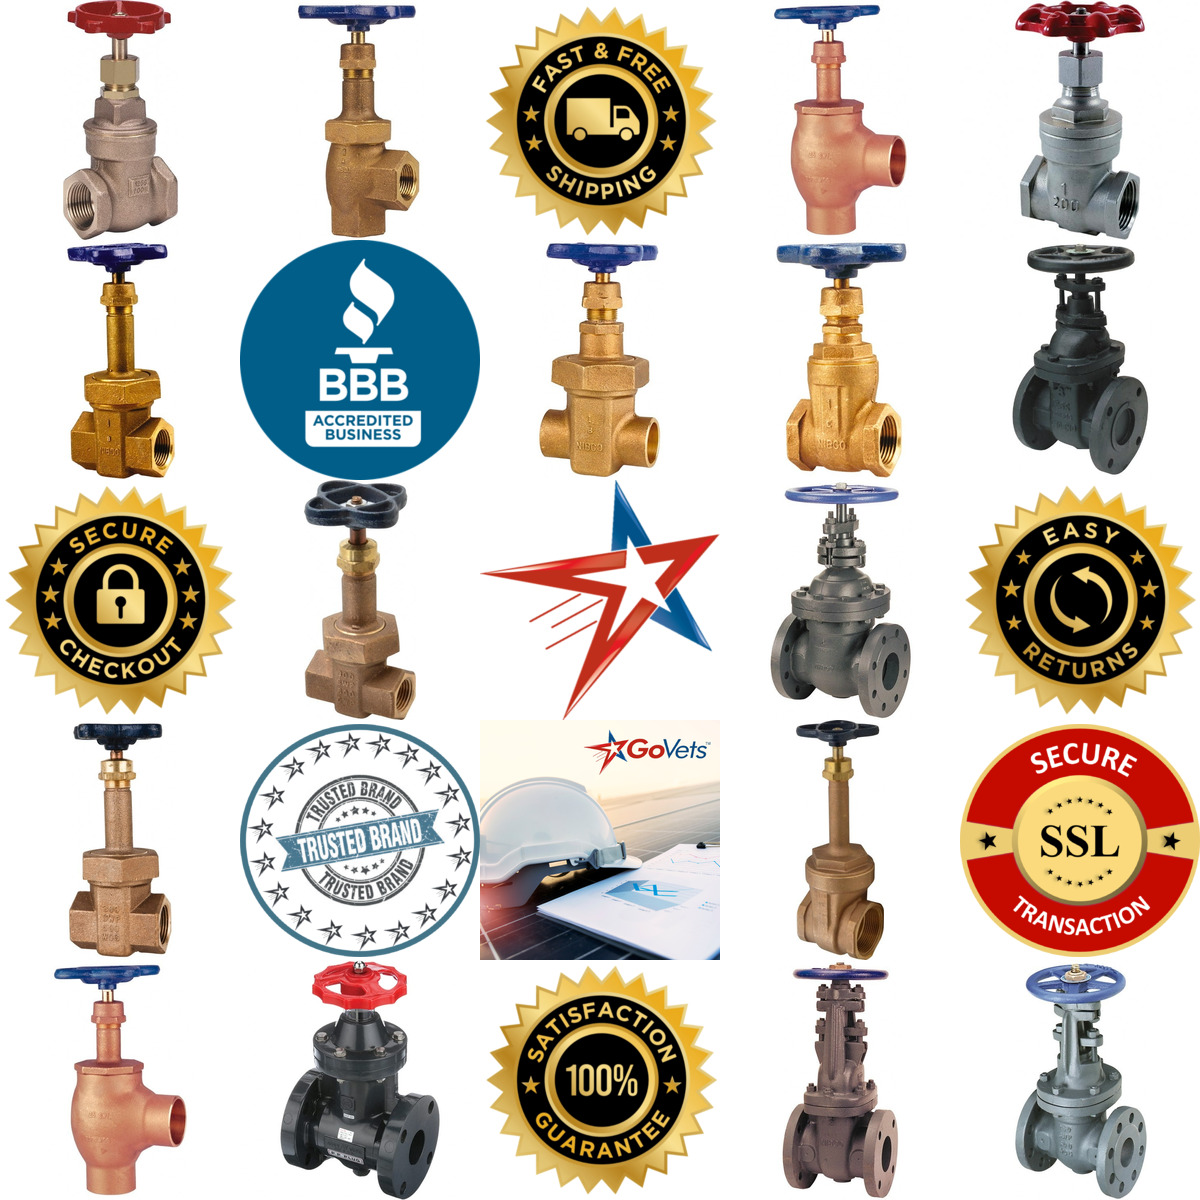 A selection of Gate Valves products on GoVets